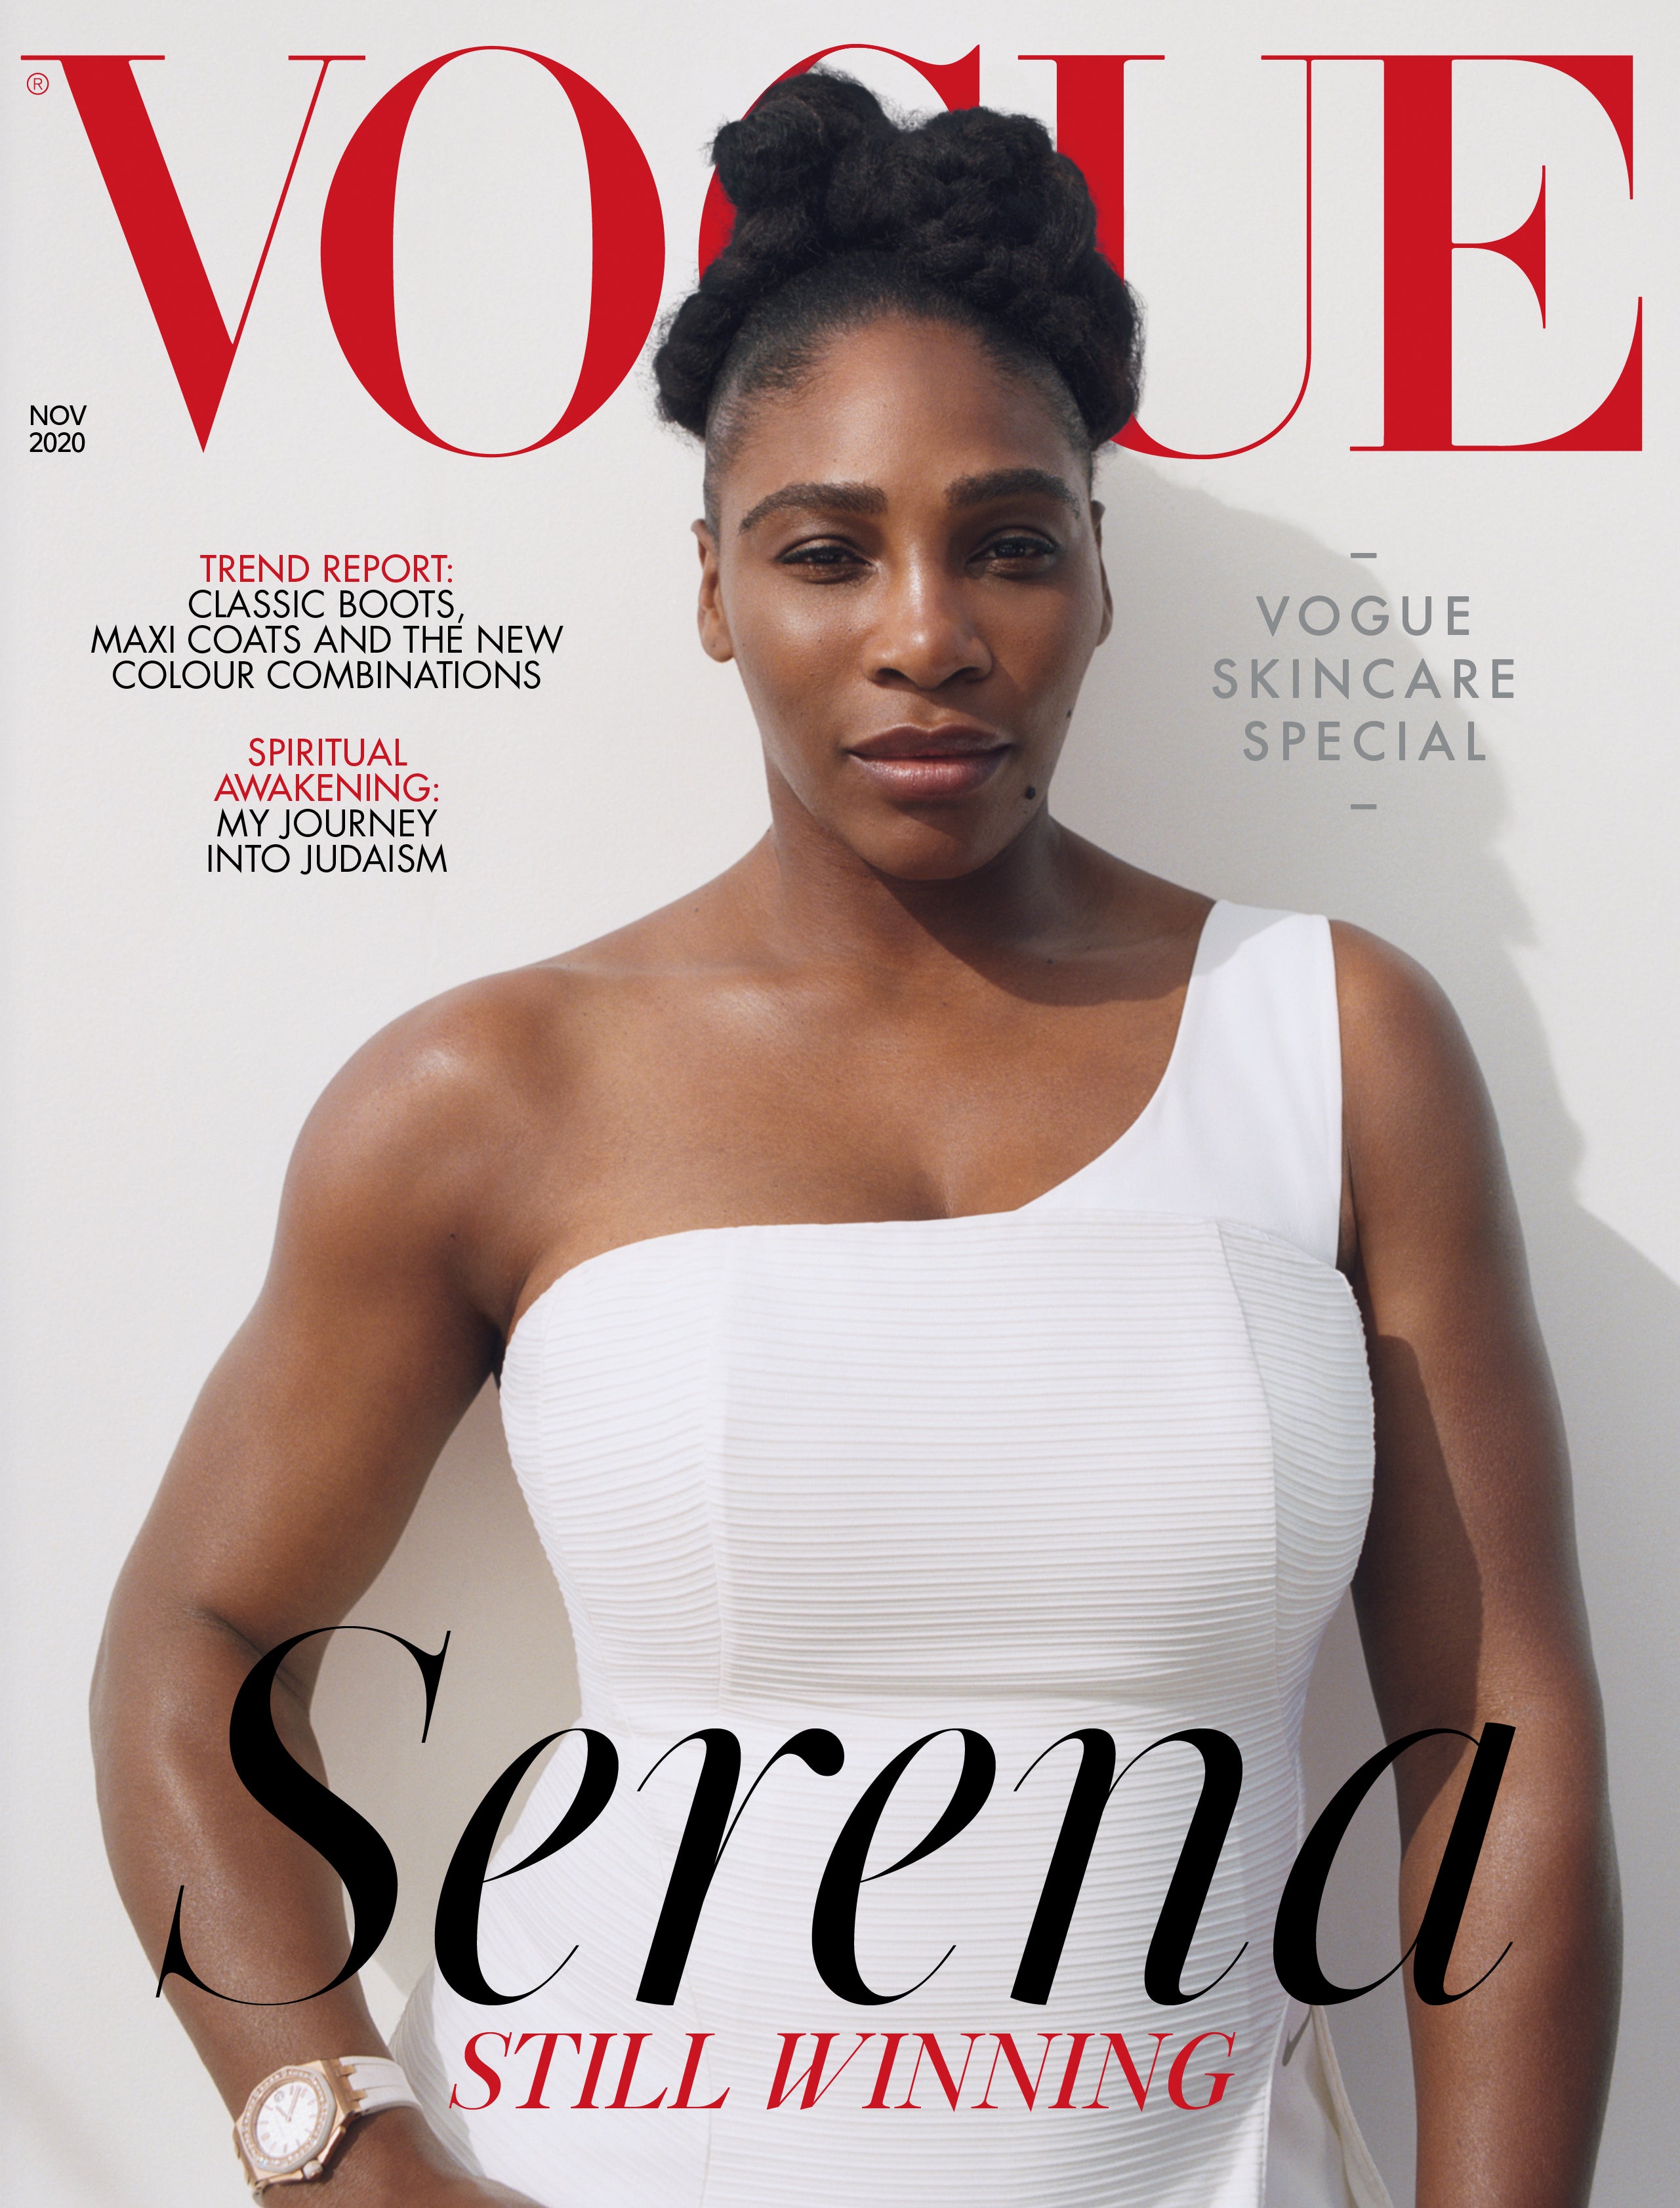 Serena Williams Says She Wants to Be 'the Voice' for Women and